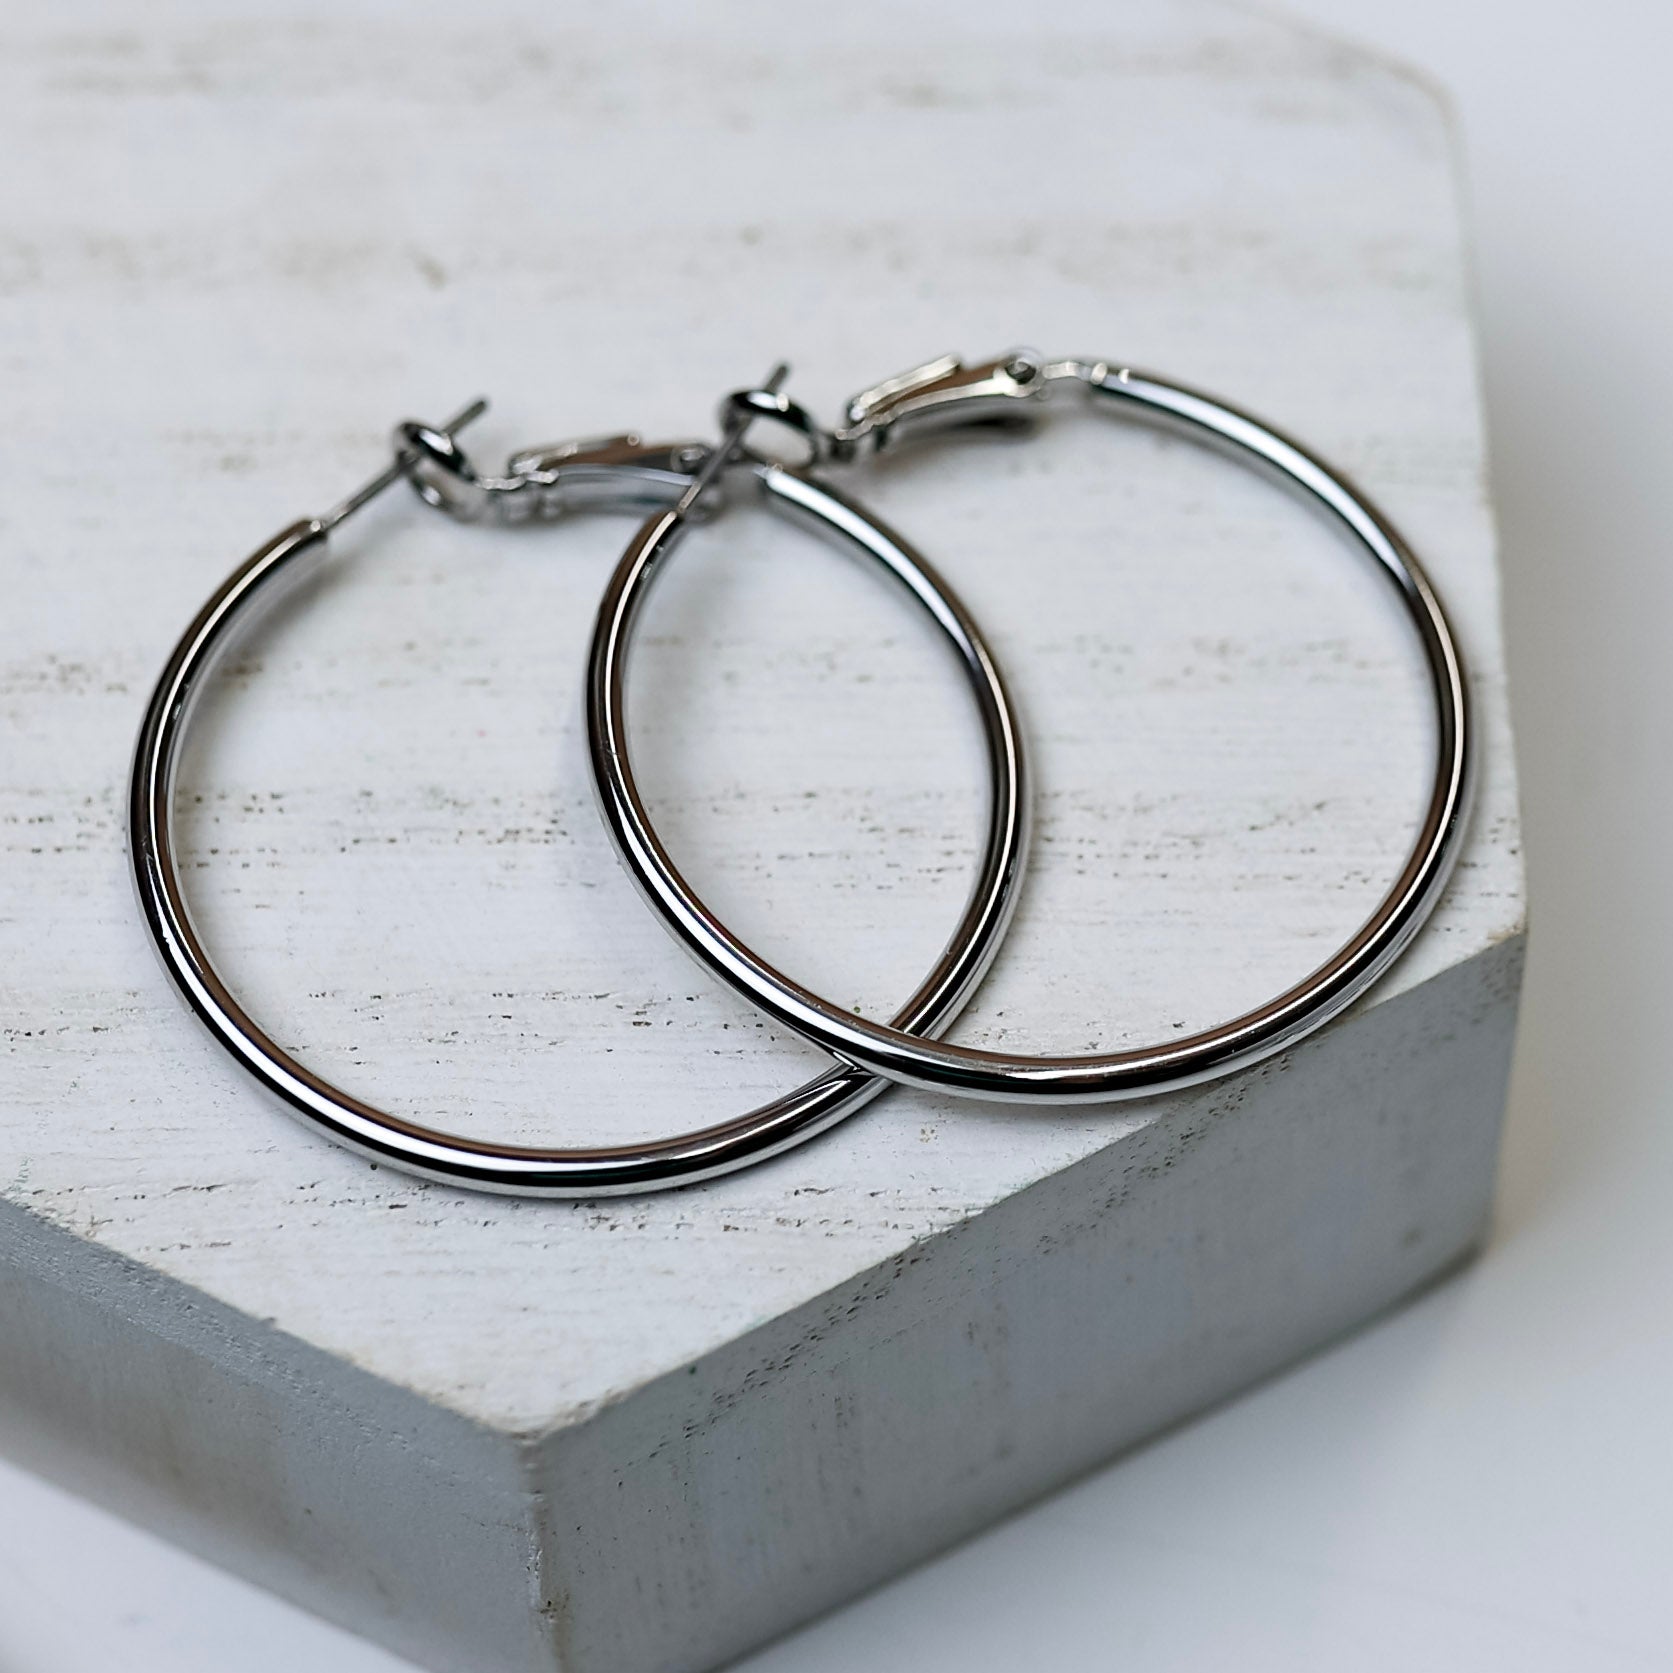 Sorrelli | Dahlia Hoop Earrings in Palladium Silver Tone - Giddy Up Glamour Boutique